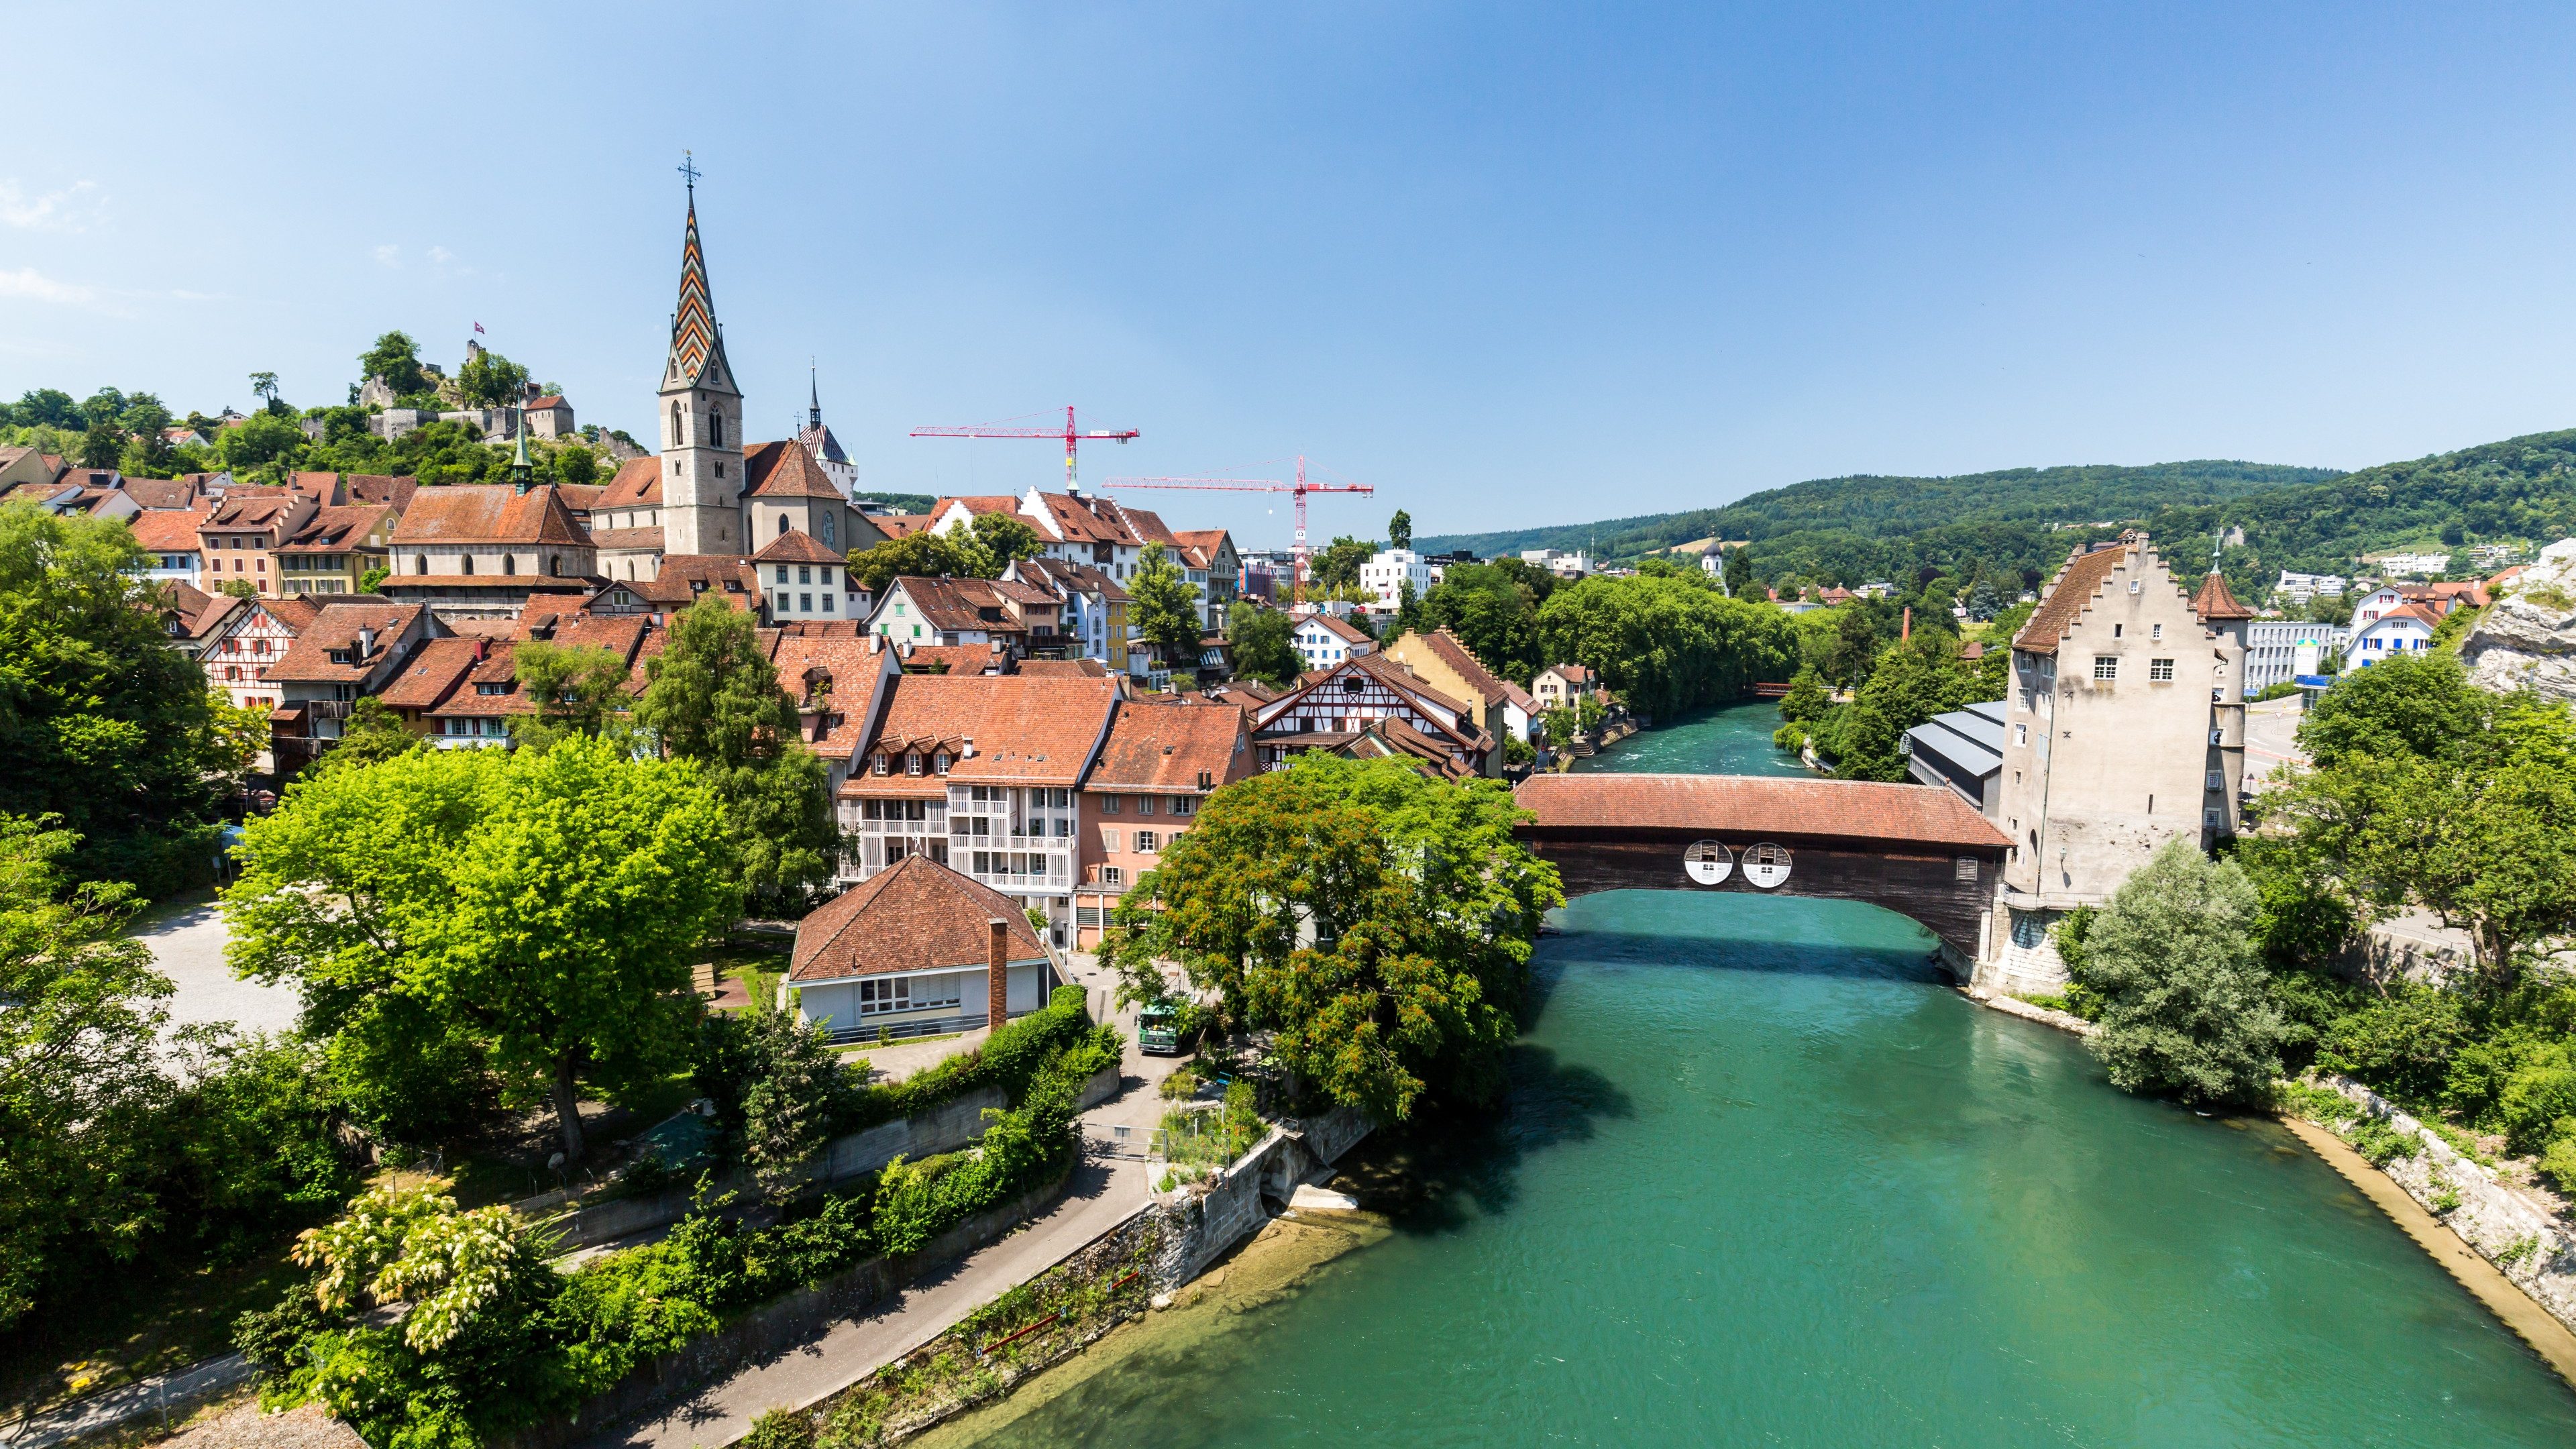 BADEN, AARGAU, SWITZERLAND - JULY 2, 2015: Exterior view from Wettingen side to the  of the city of Baden and river Limmat on June 30, 2015. Baden is a municipality in the Swiss canton of Aargau.